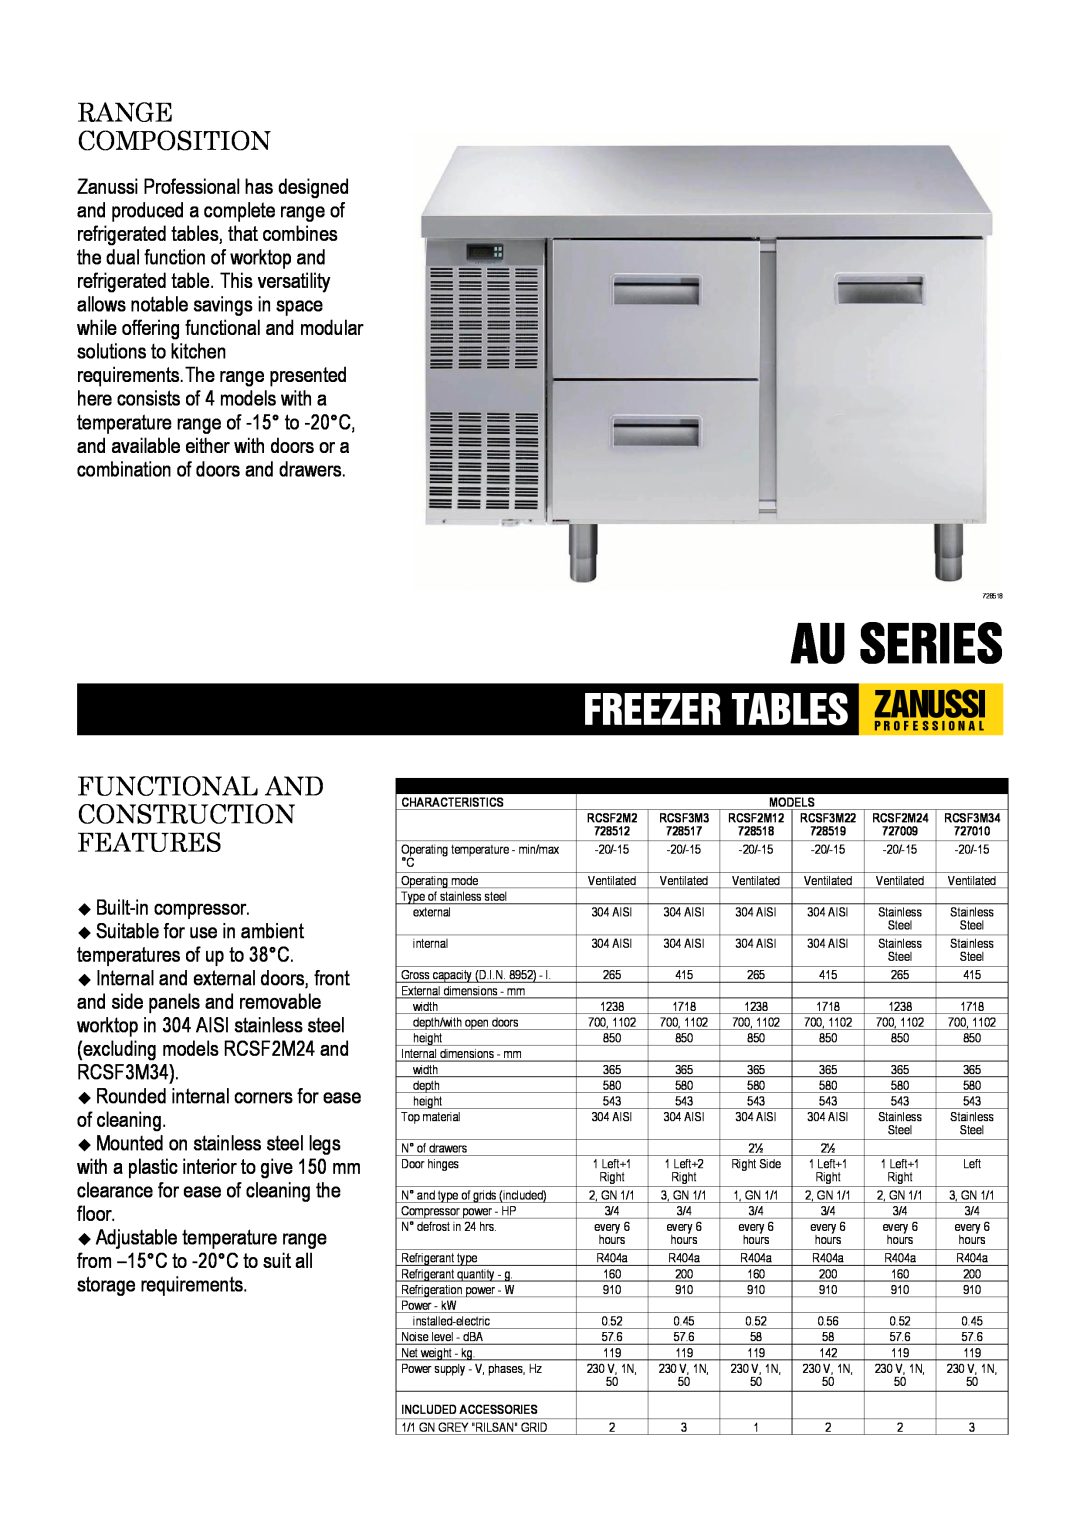 Zanussi RCSF2M24, RCSF3M34, RCSF3M22 dimensions Au Series, Range Composition, Functional And Construction Features 